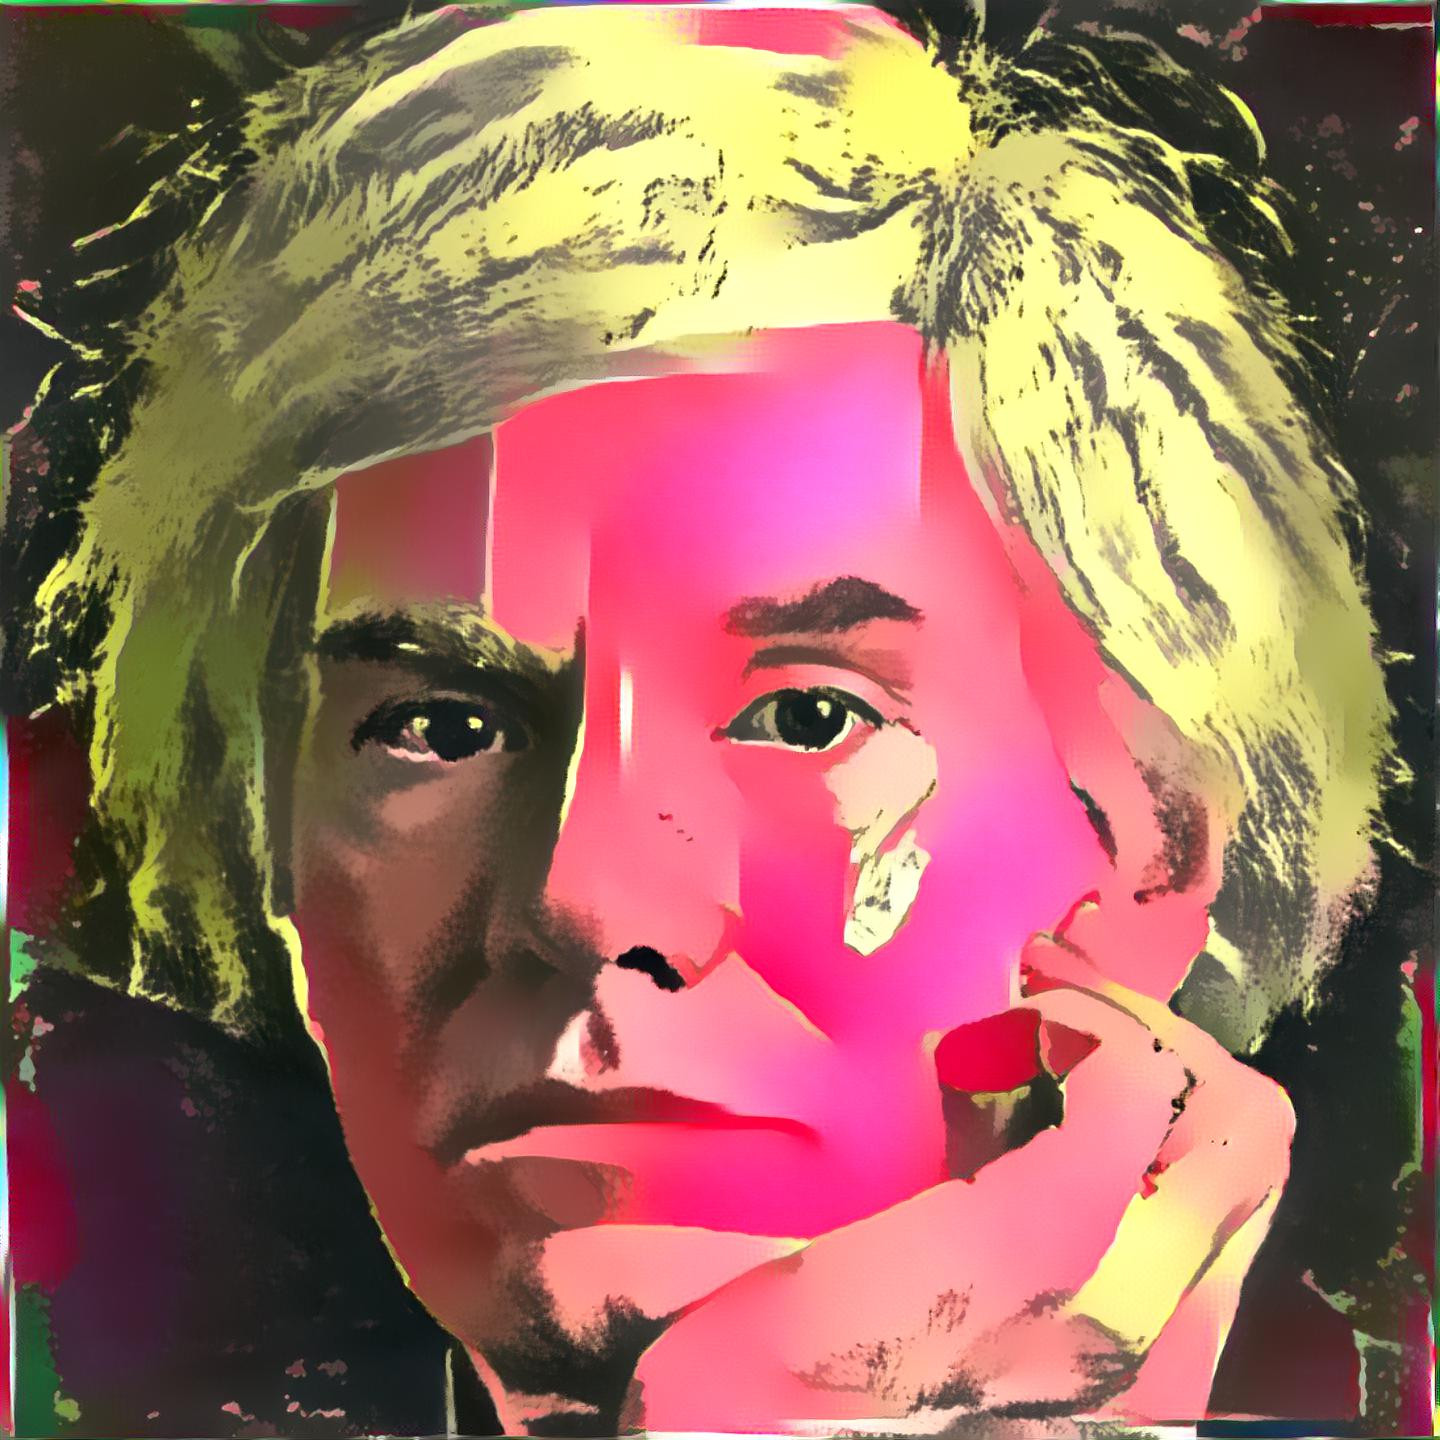 Andy Warhol didn't know